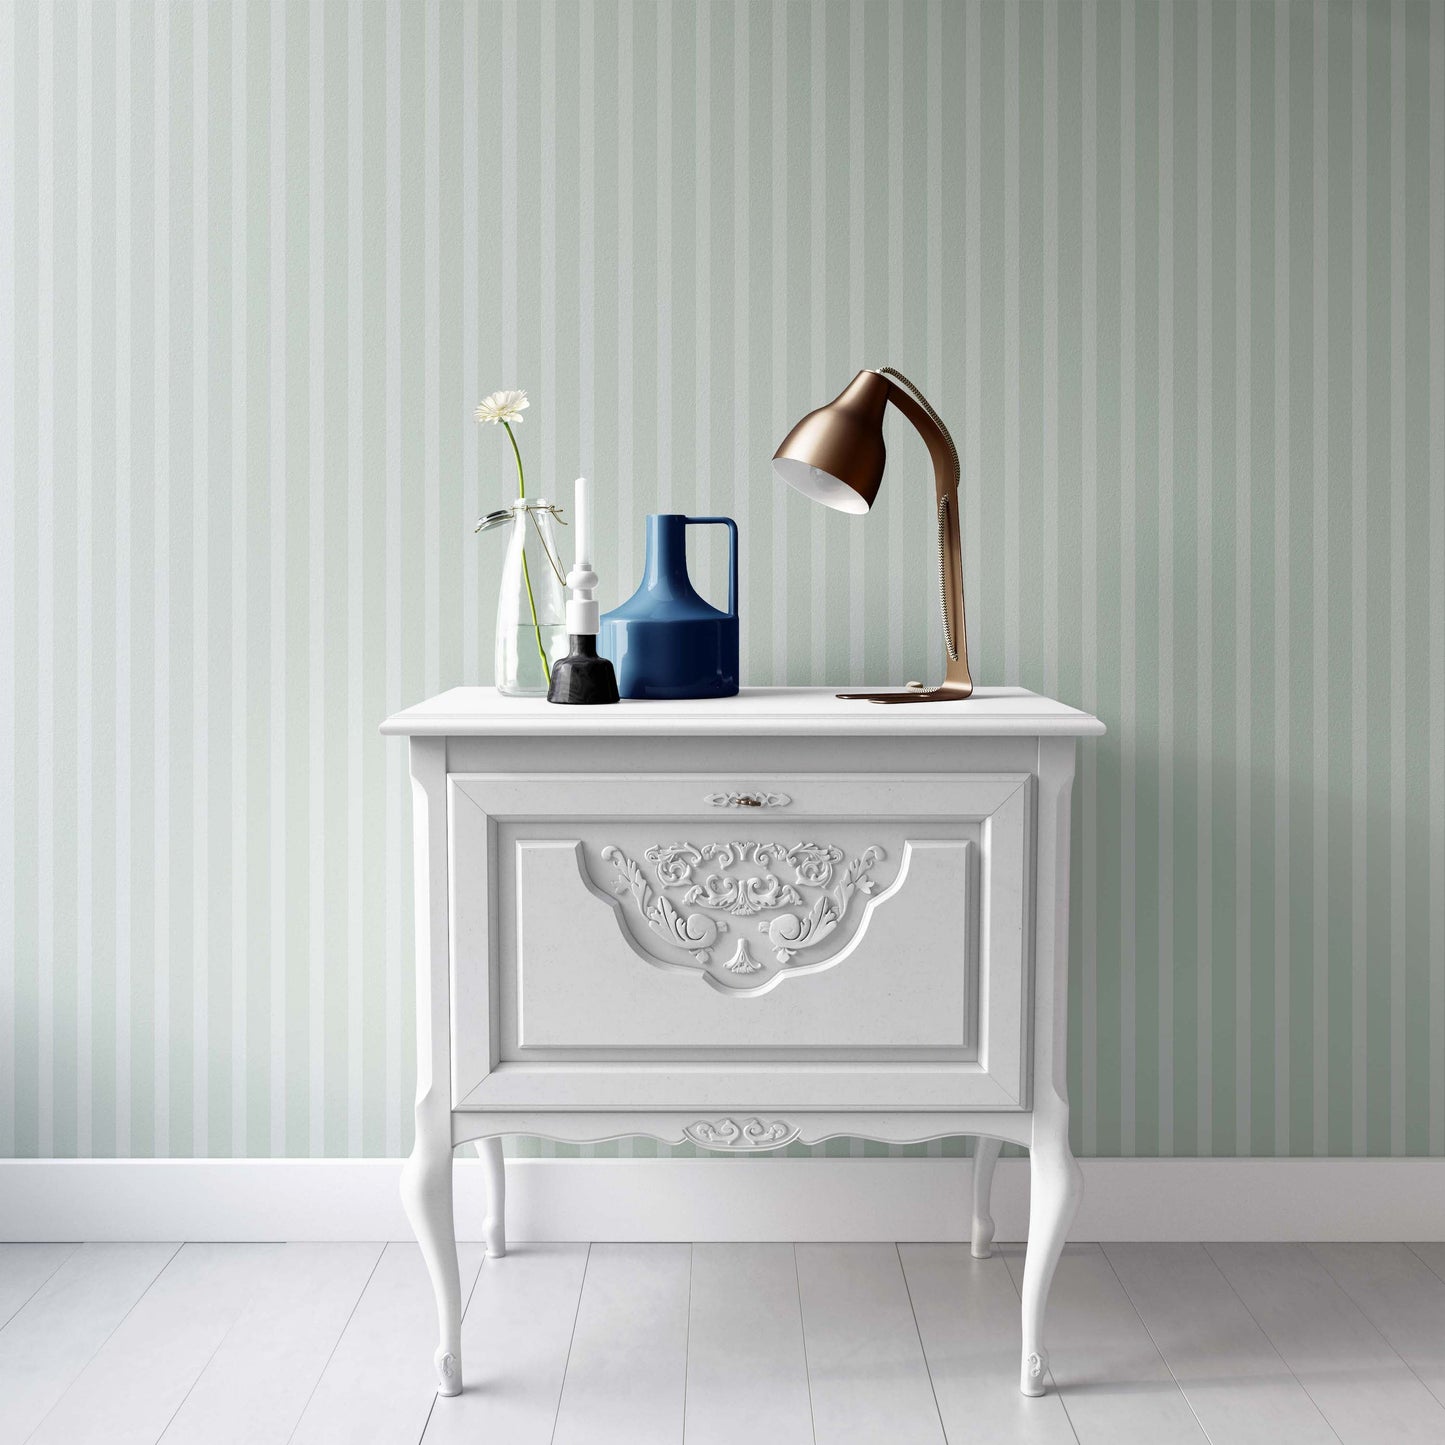 Victorian Stripe | Clay Coated | Wallpaper